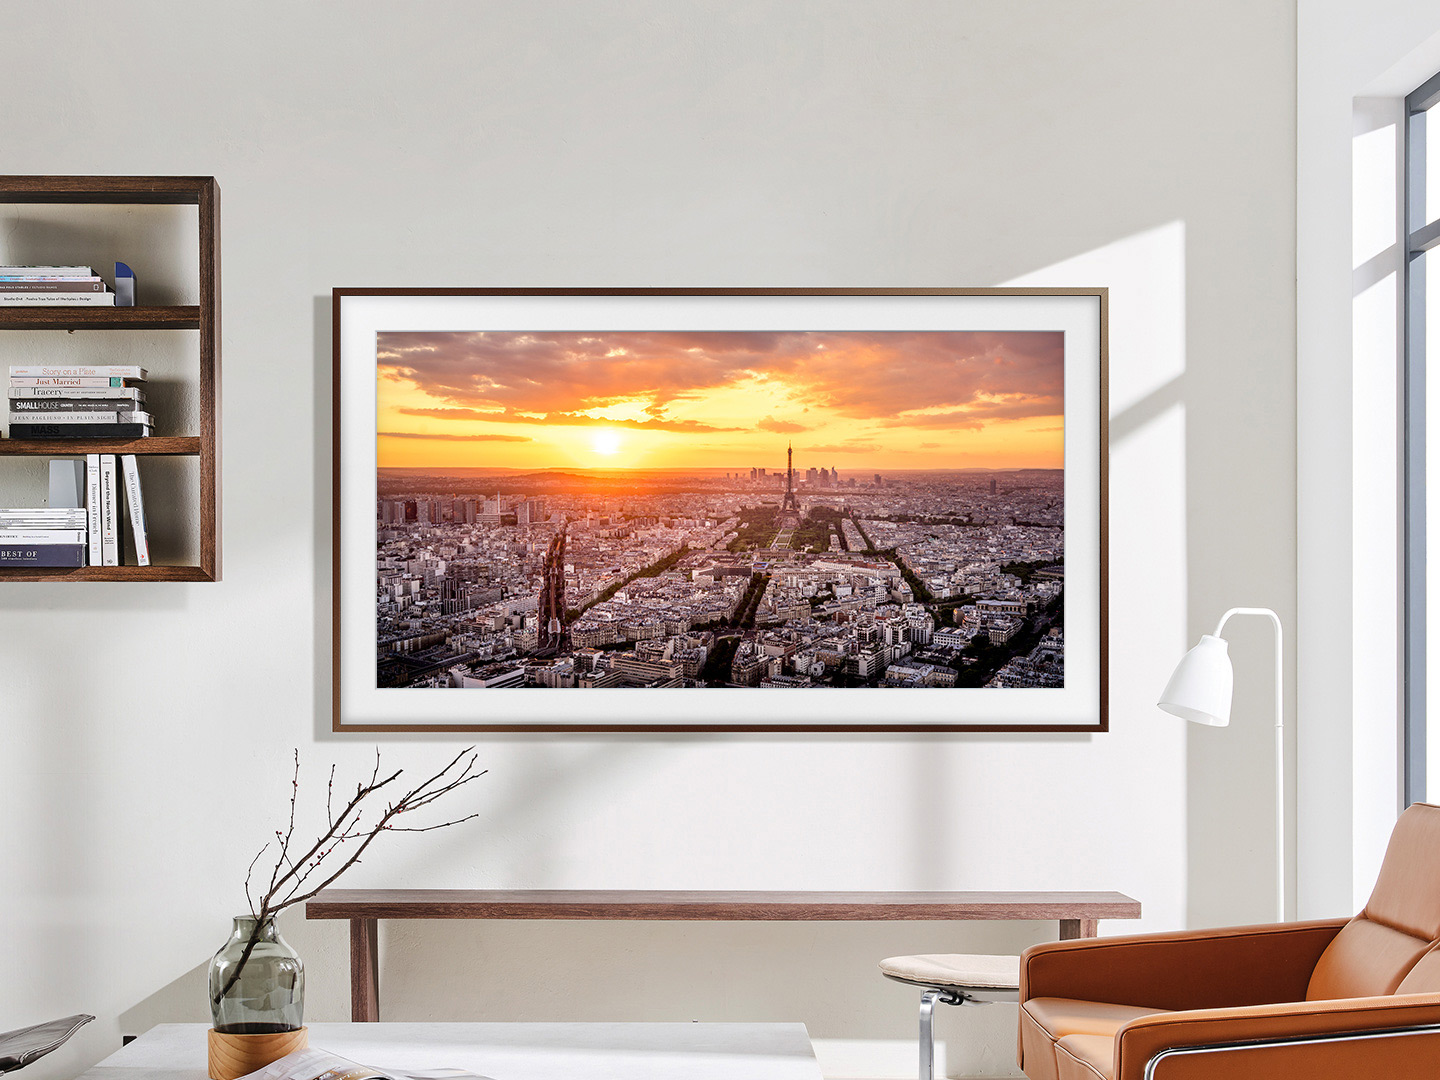 Artwork, shows, movies and memories—display what you love on The Frame, the picture frame-like …